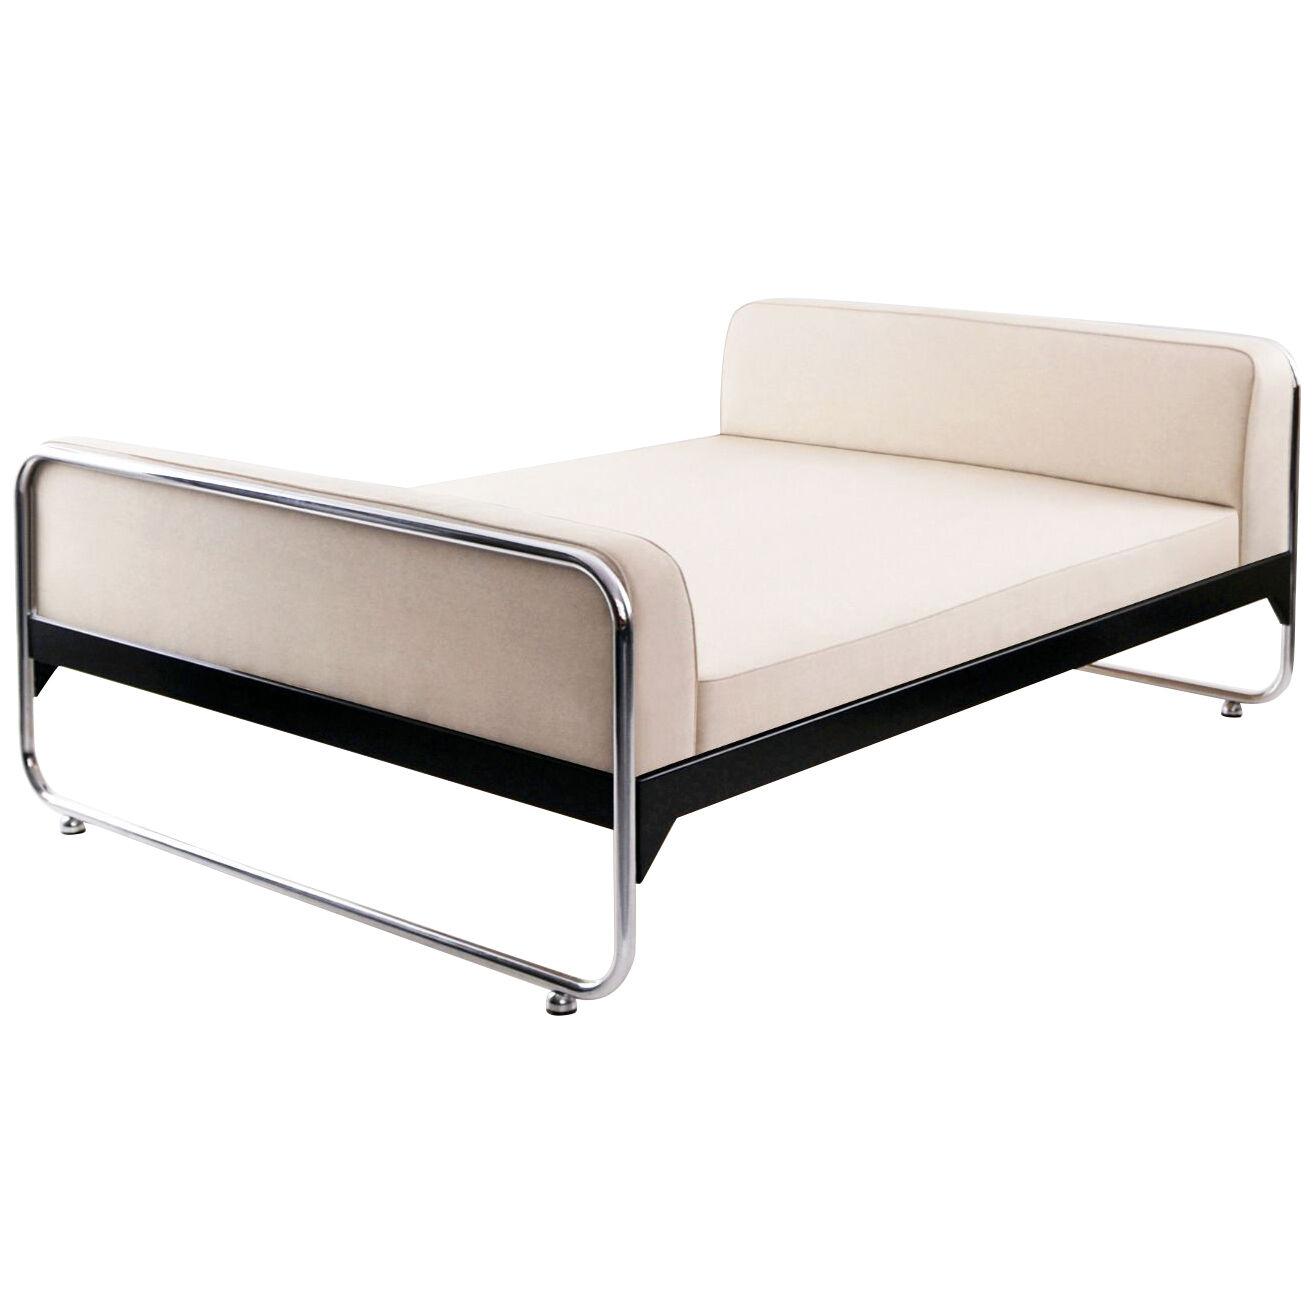 Modernist customizable tubular steel bed with fabric upholstery